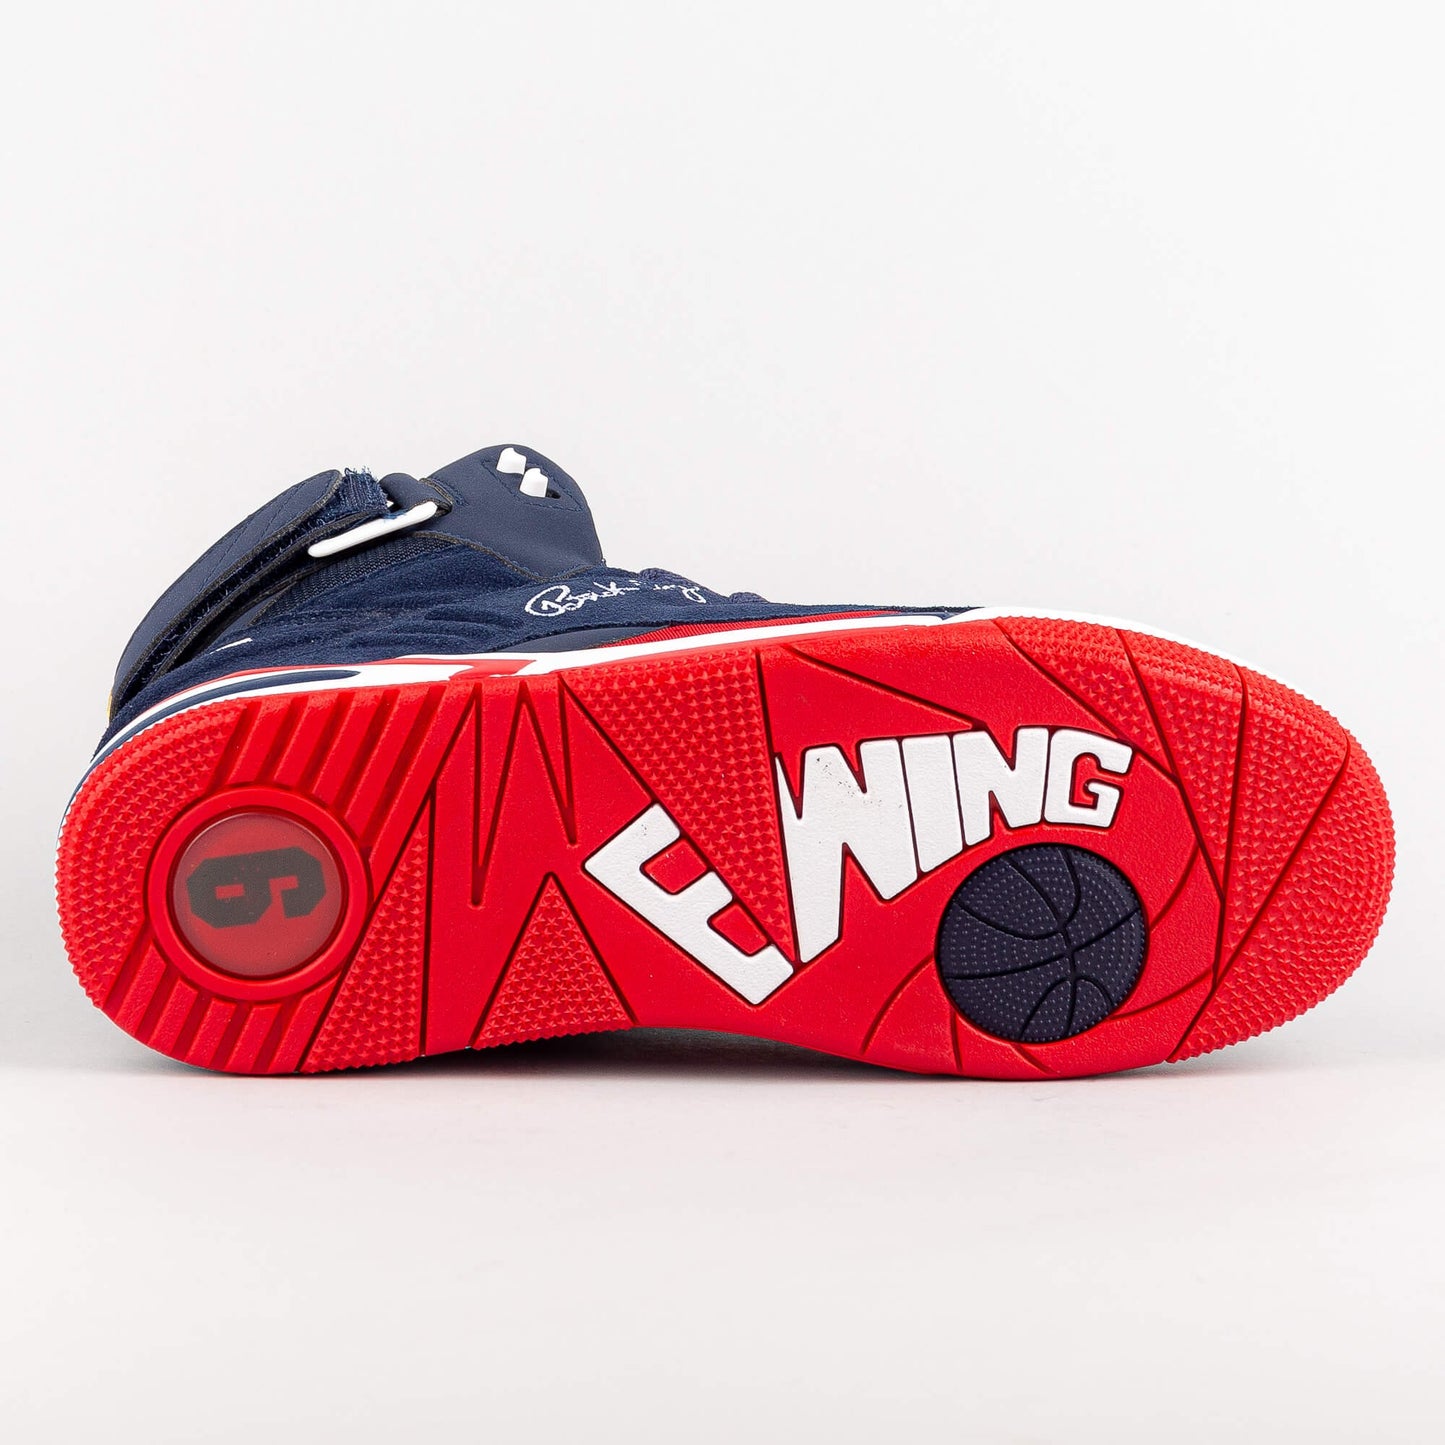 Ewing Athletics ECLIPSE Navy/Red White Barcelona 1992 USA Dream Team “Away” Colorway